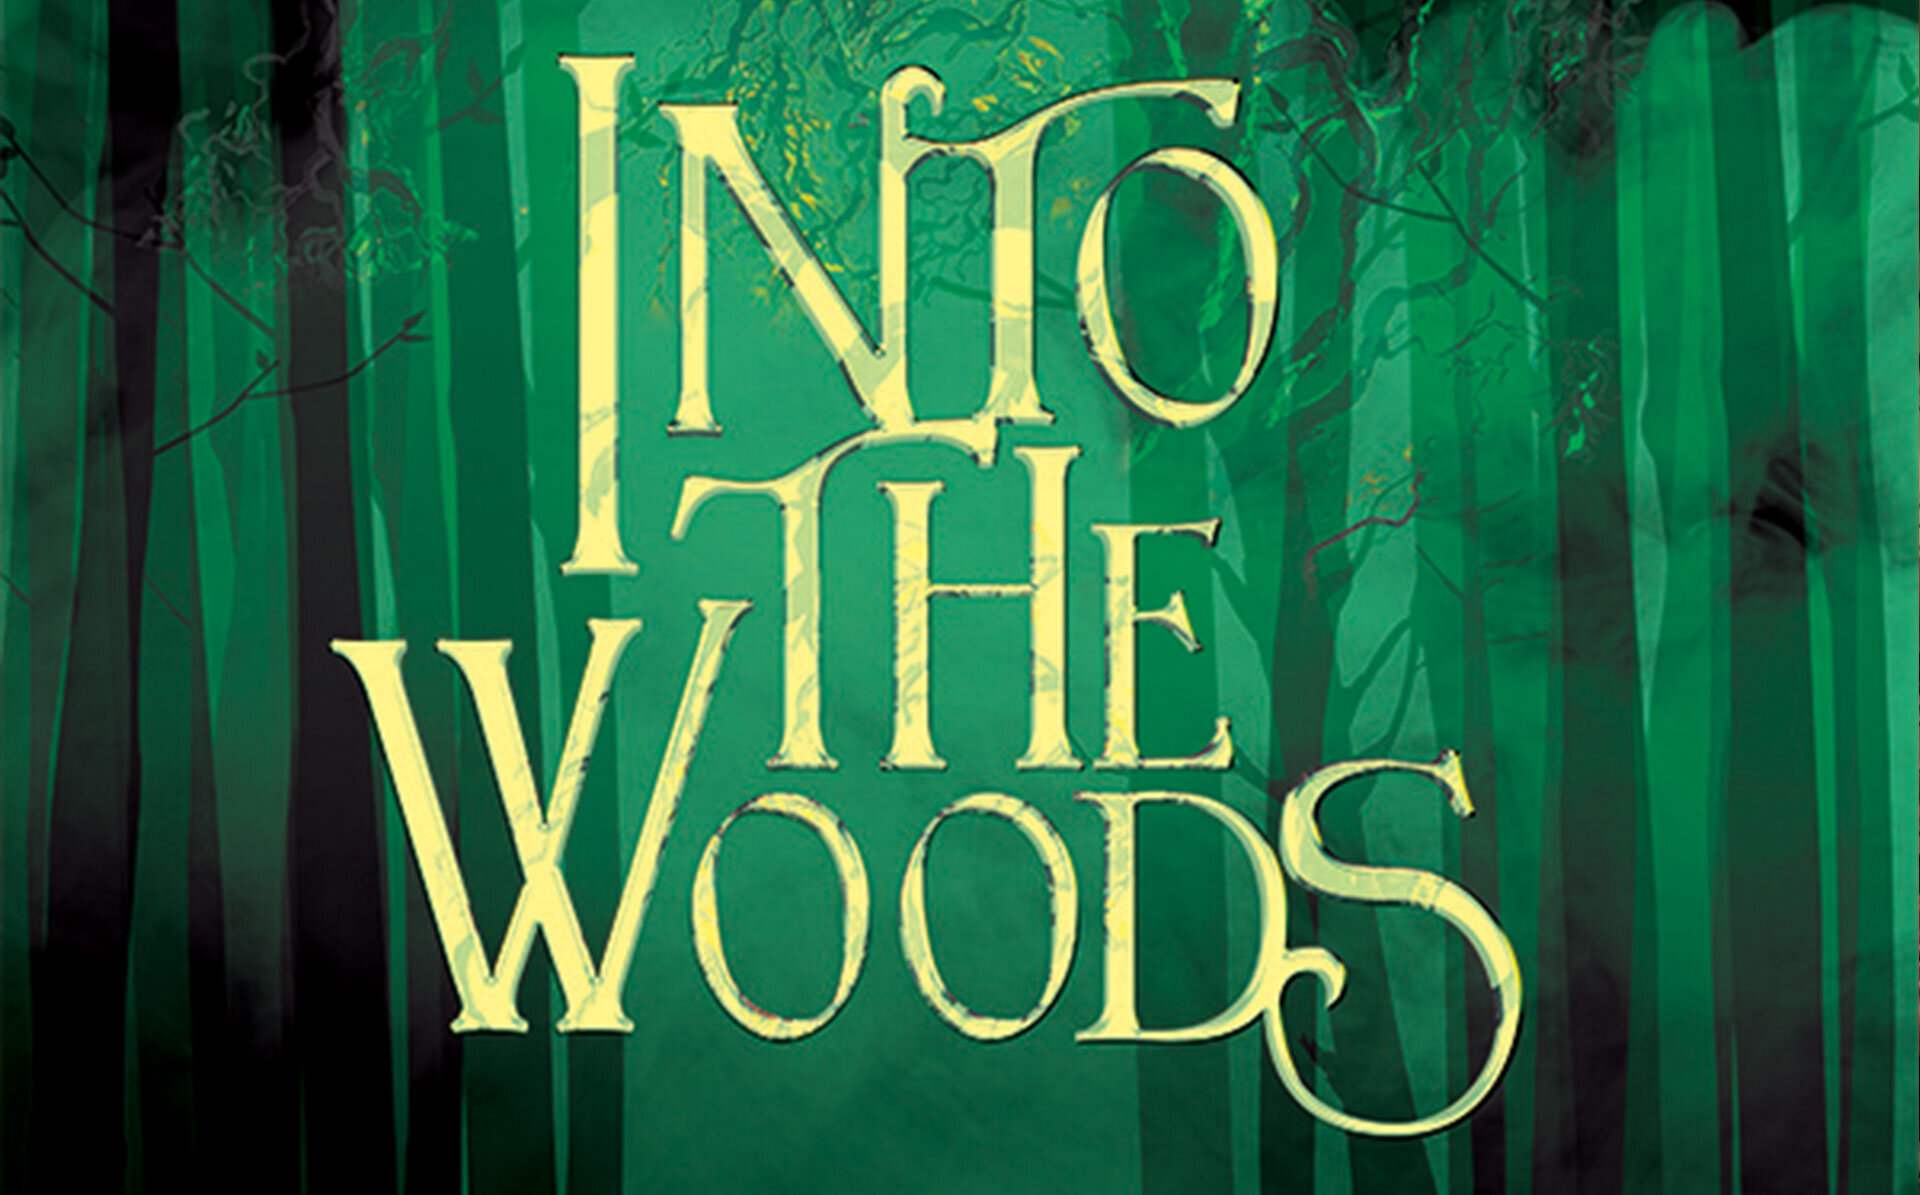 Tickets to Into the Woods